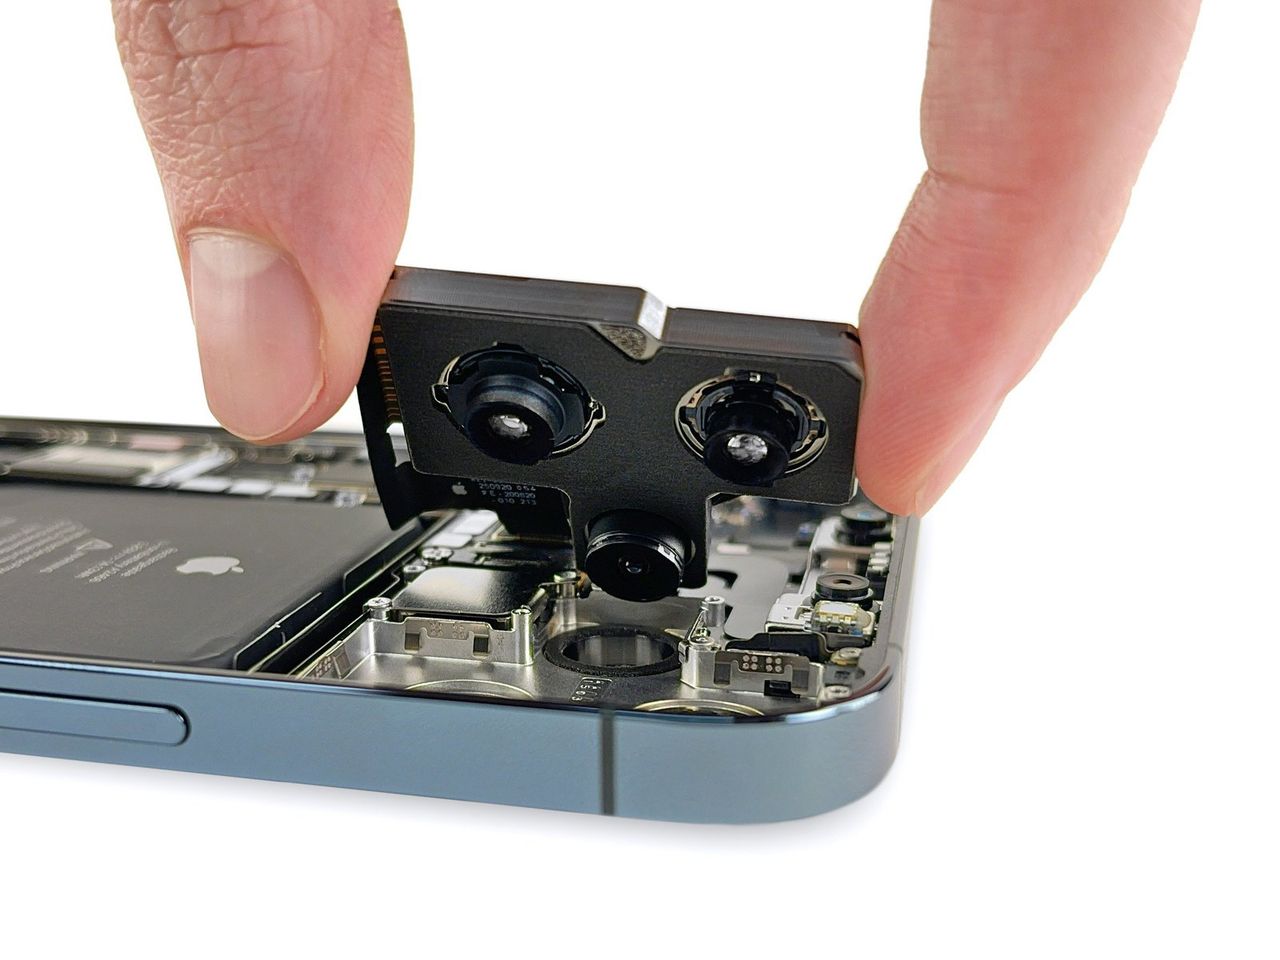 iFixit tears apart the iPhone 12 Pro Max